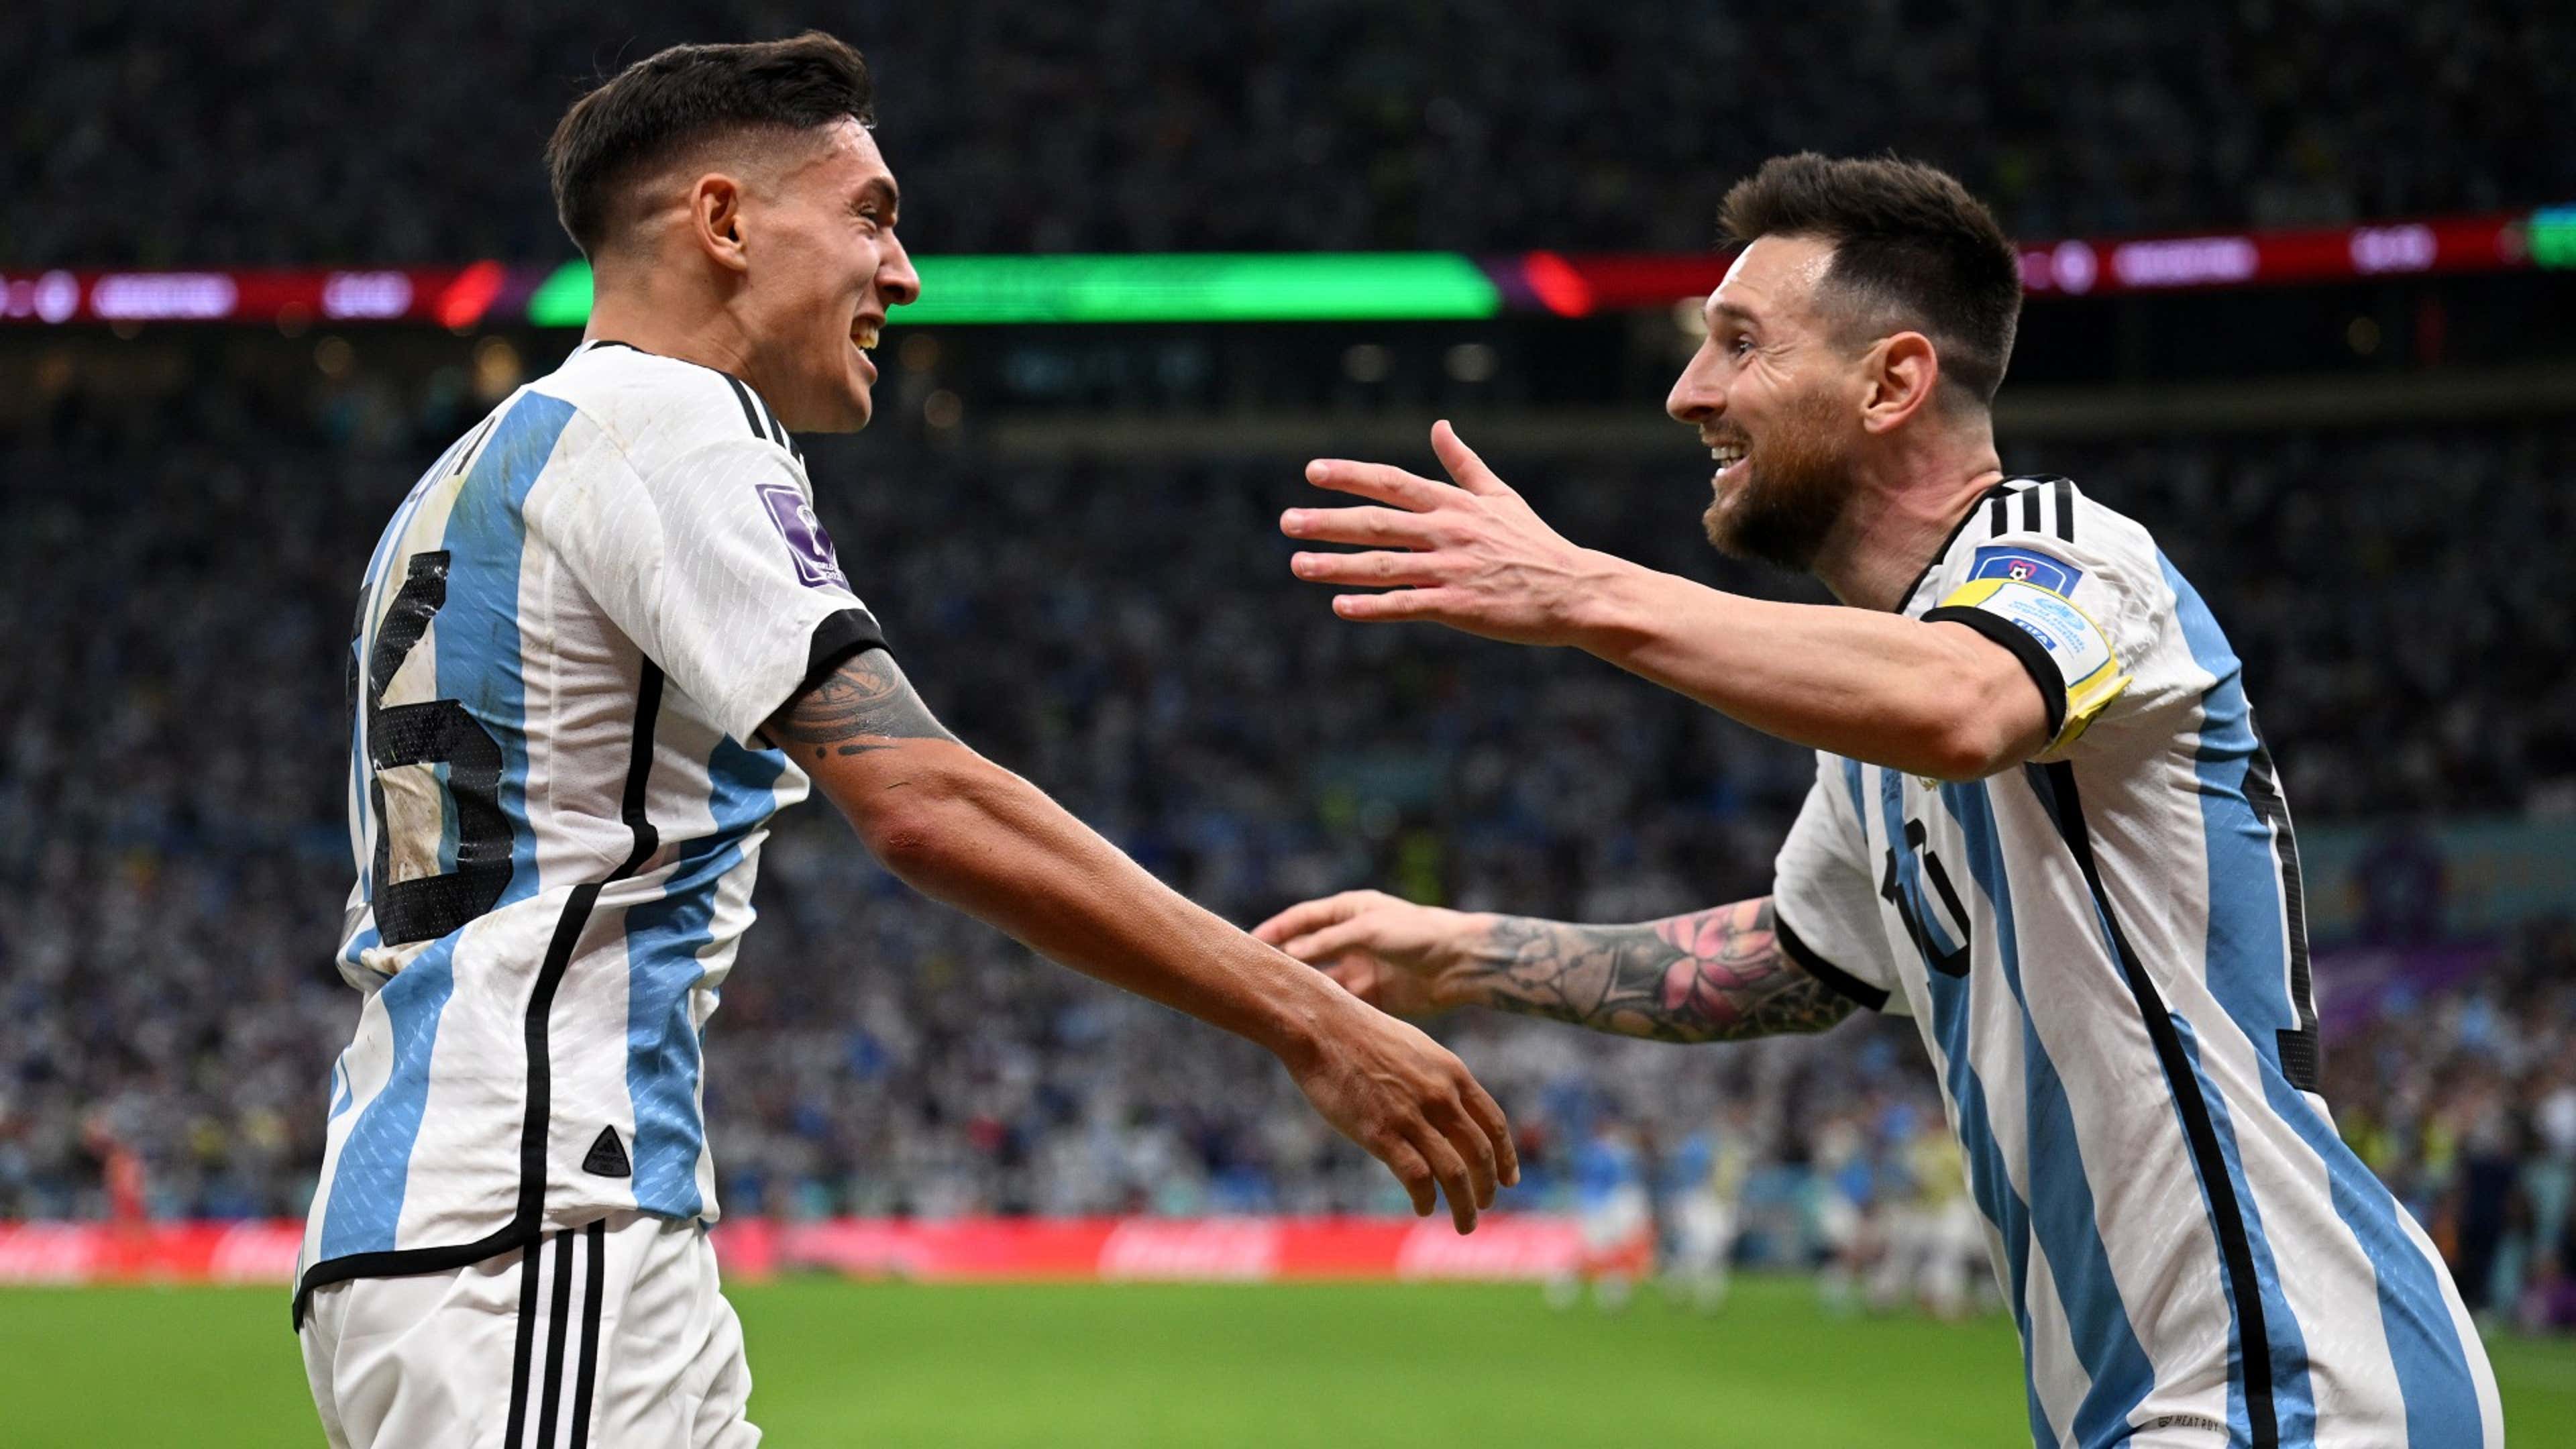 WATCH: Magical Messi assist allows Molina to open scoring against  Netherlands in World Cup quarter-final